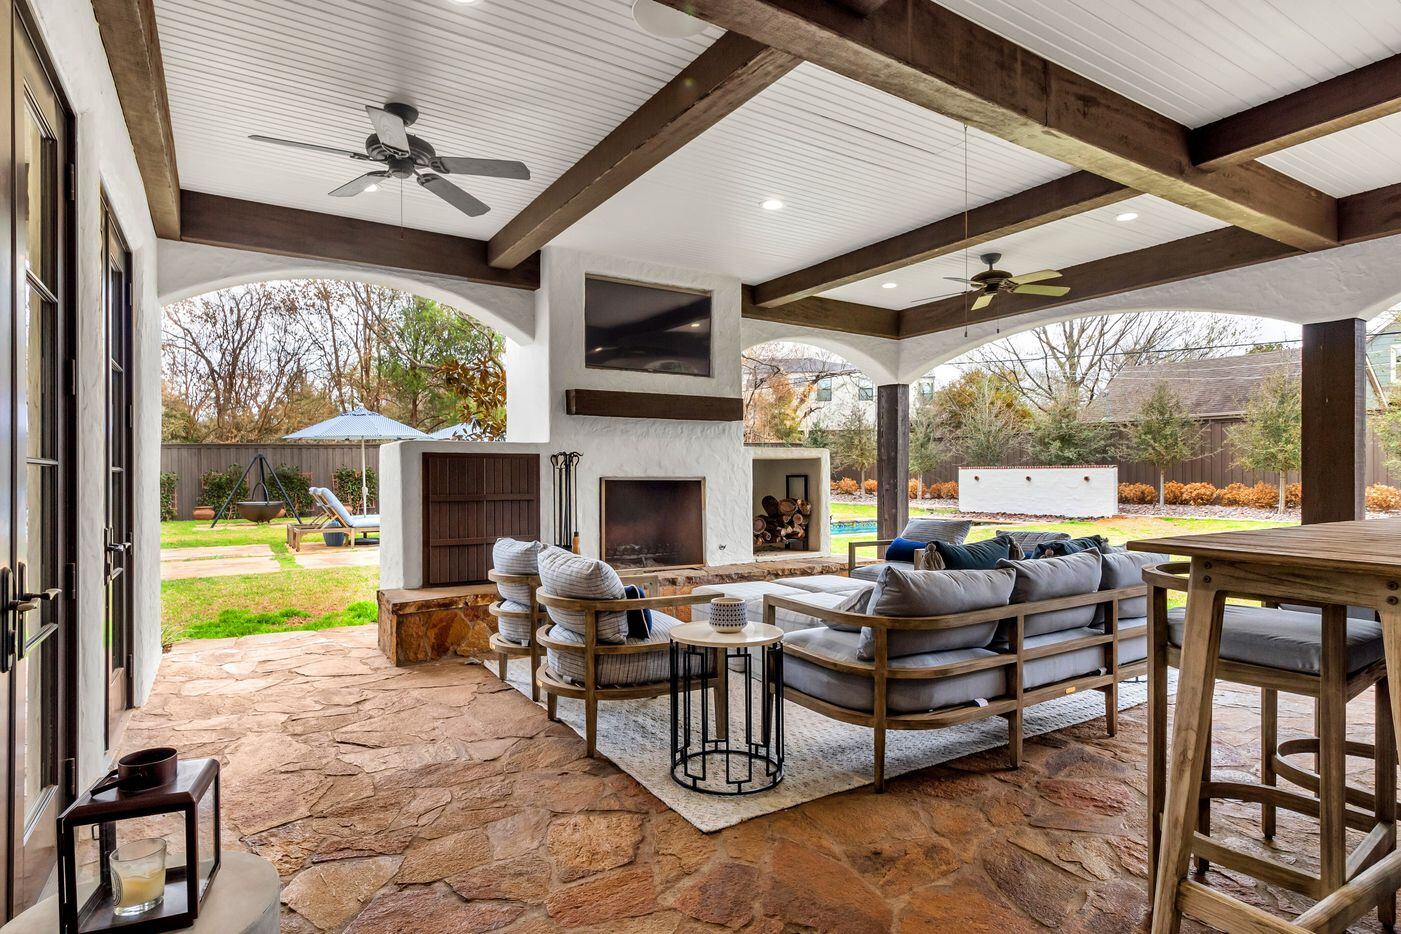 Take a look inside the house at 4618 Cherokee Trail in Dallas.